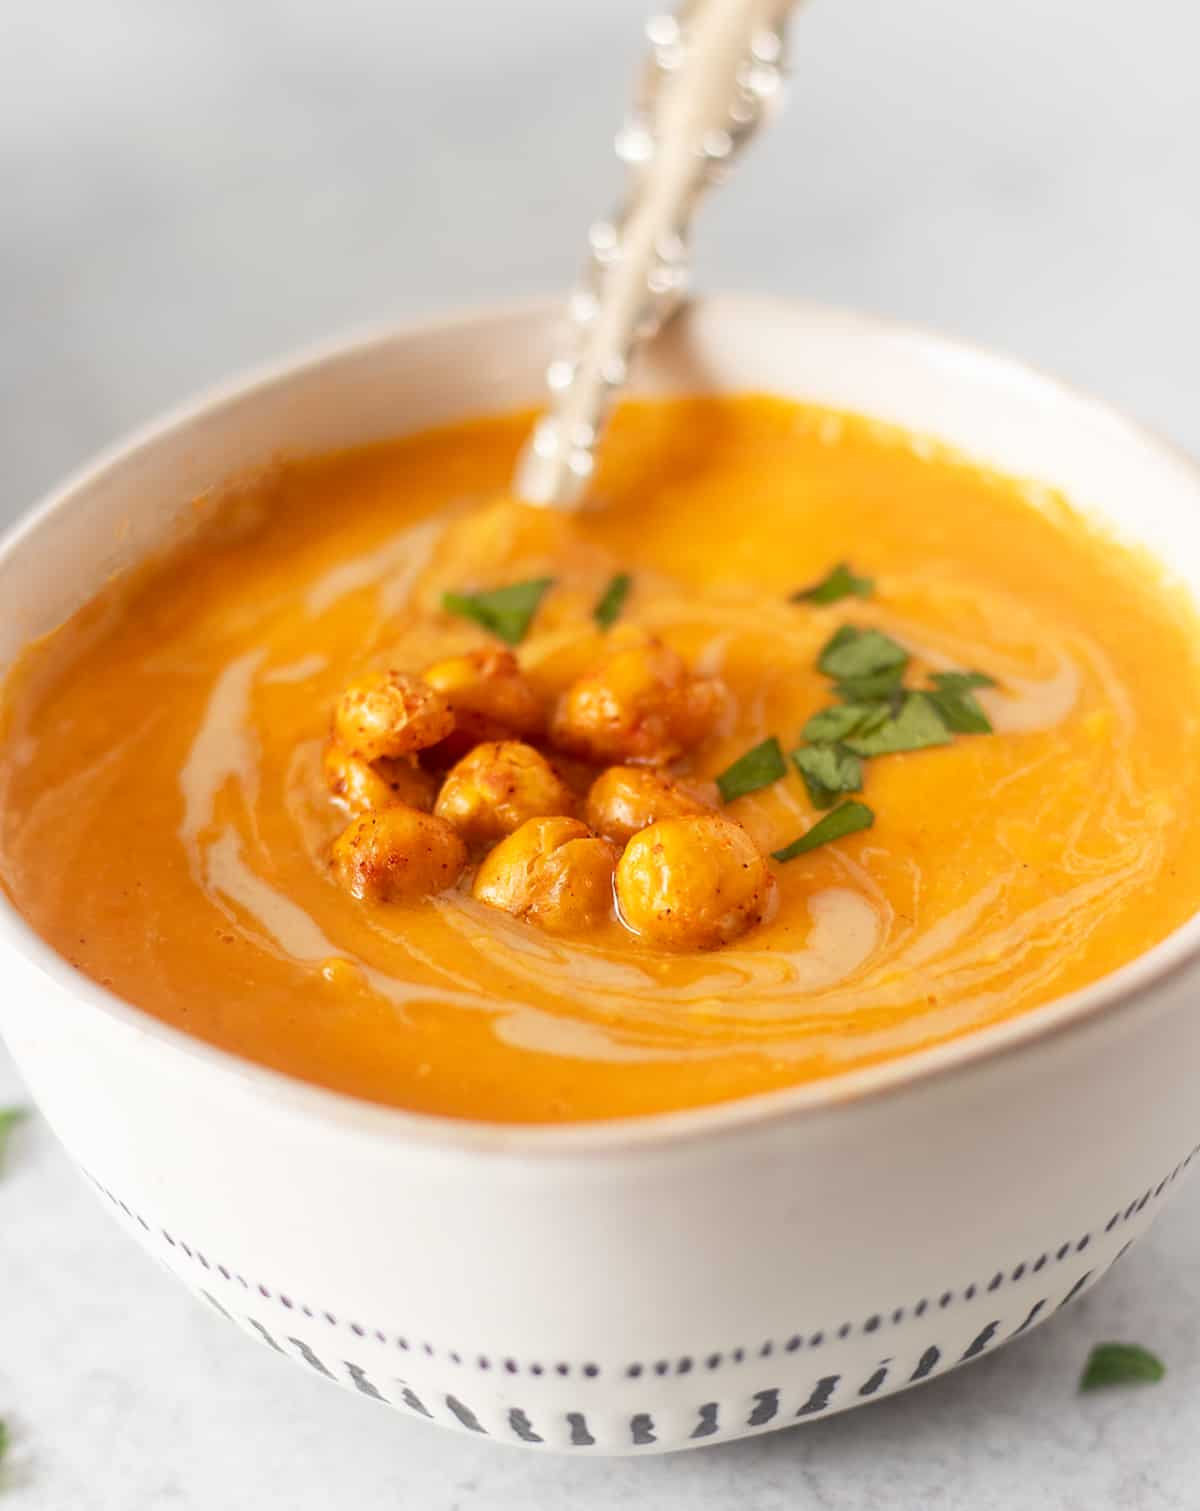 sweet potato soup in a white bowl with a silver serving spoon and garnished with roasted chickpeas and chopped parsley